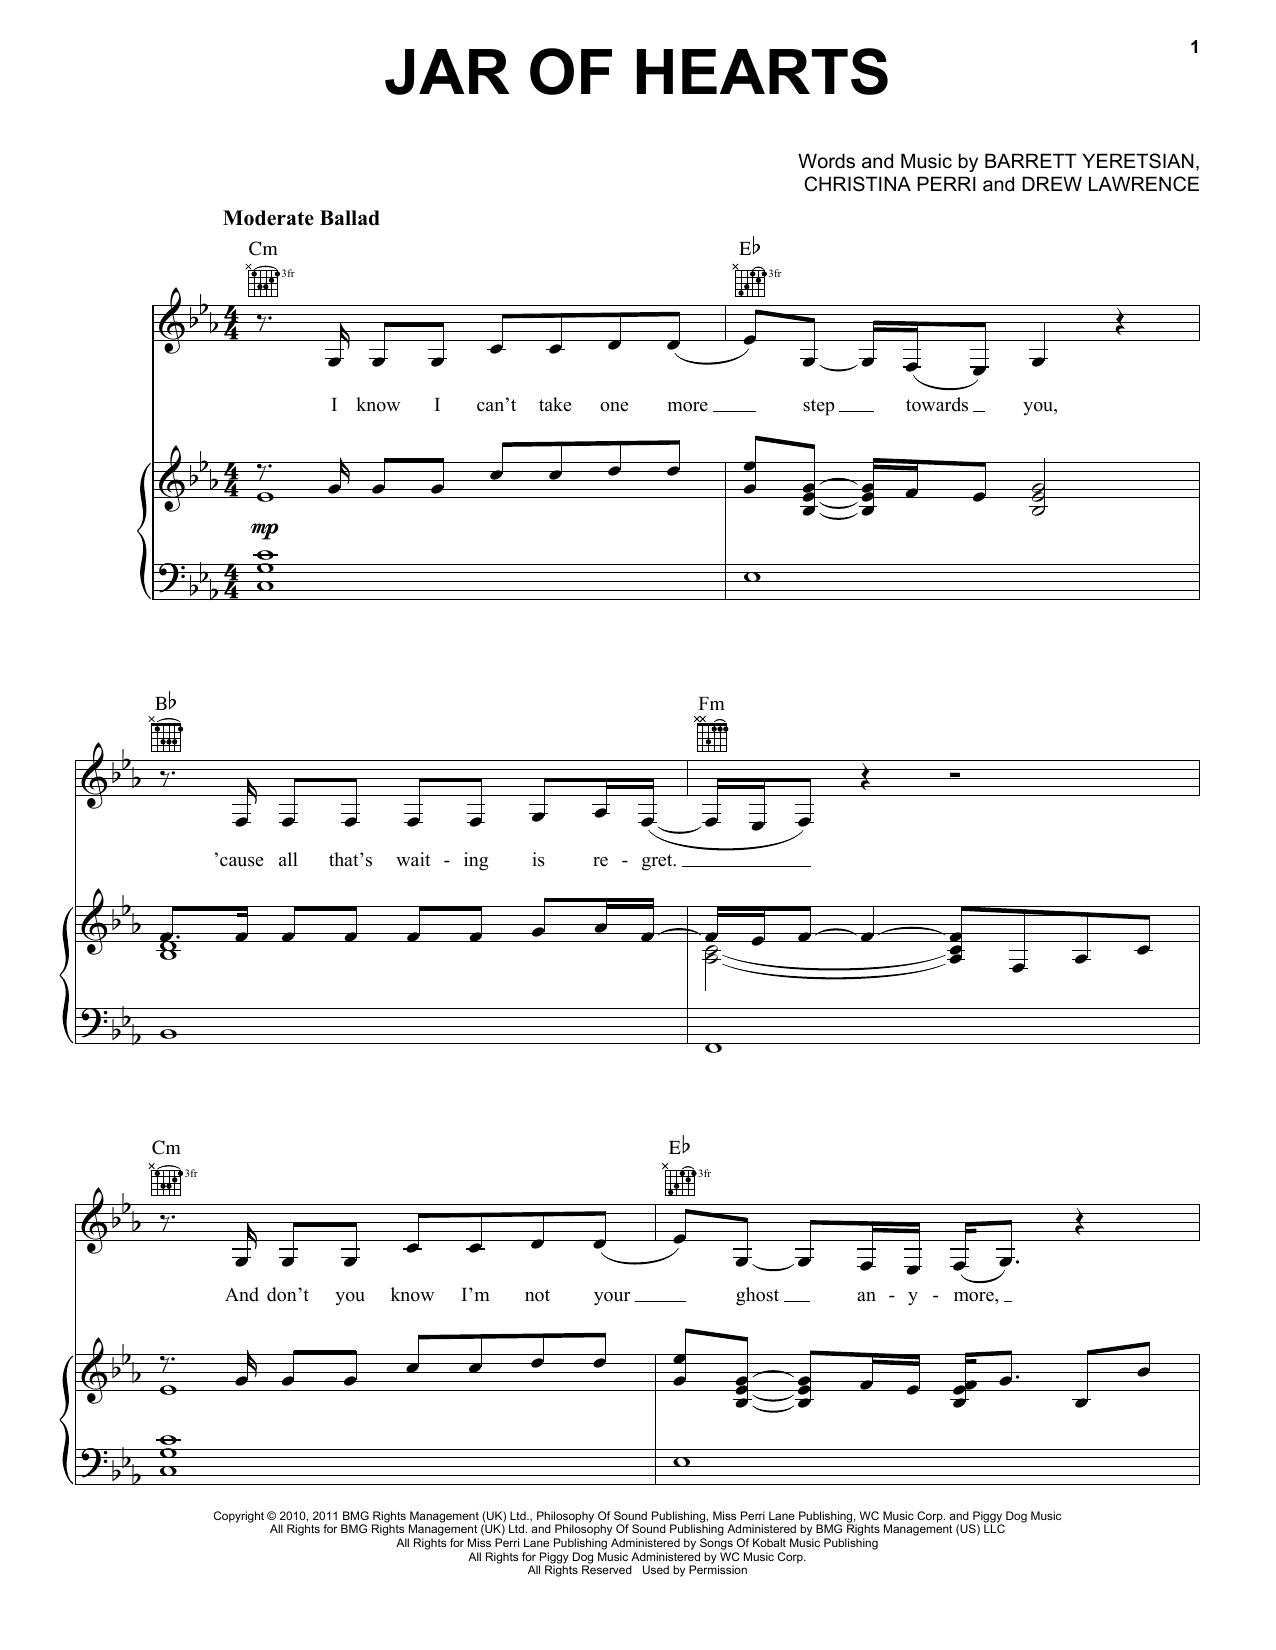 Christina Perri Jar Of Hearts sheet music preview music notes and score for Violin including 3 page(s)